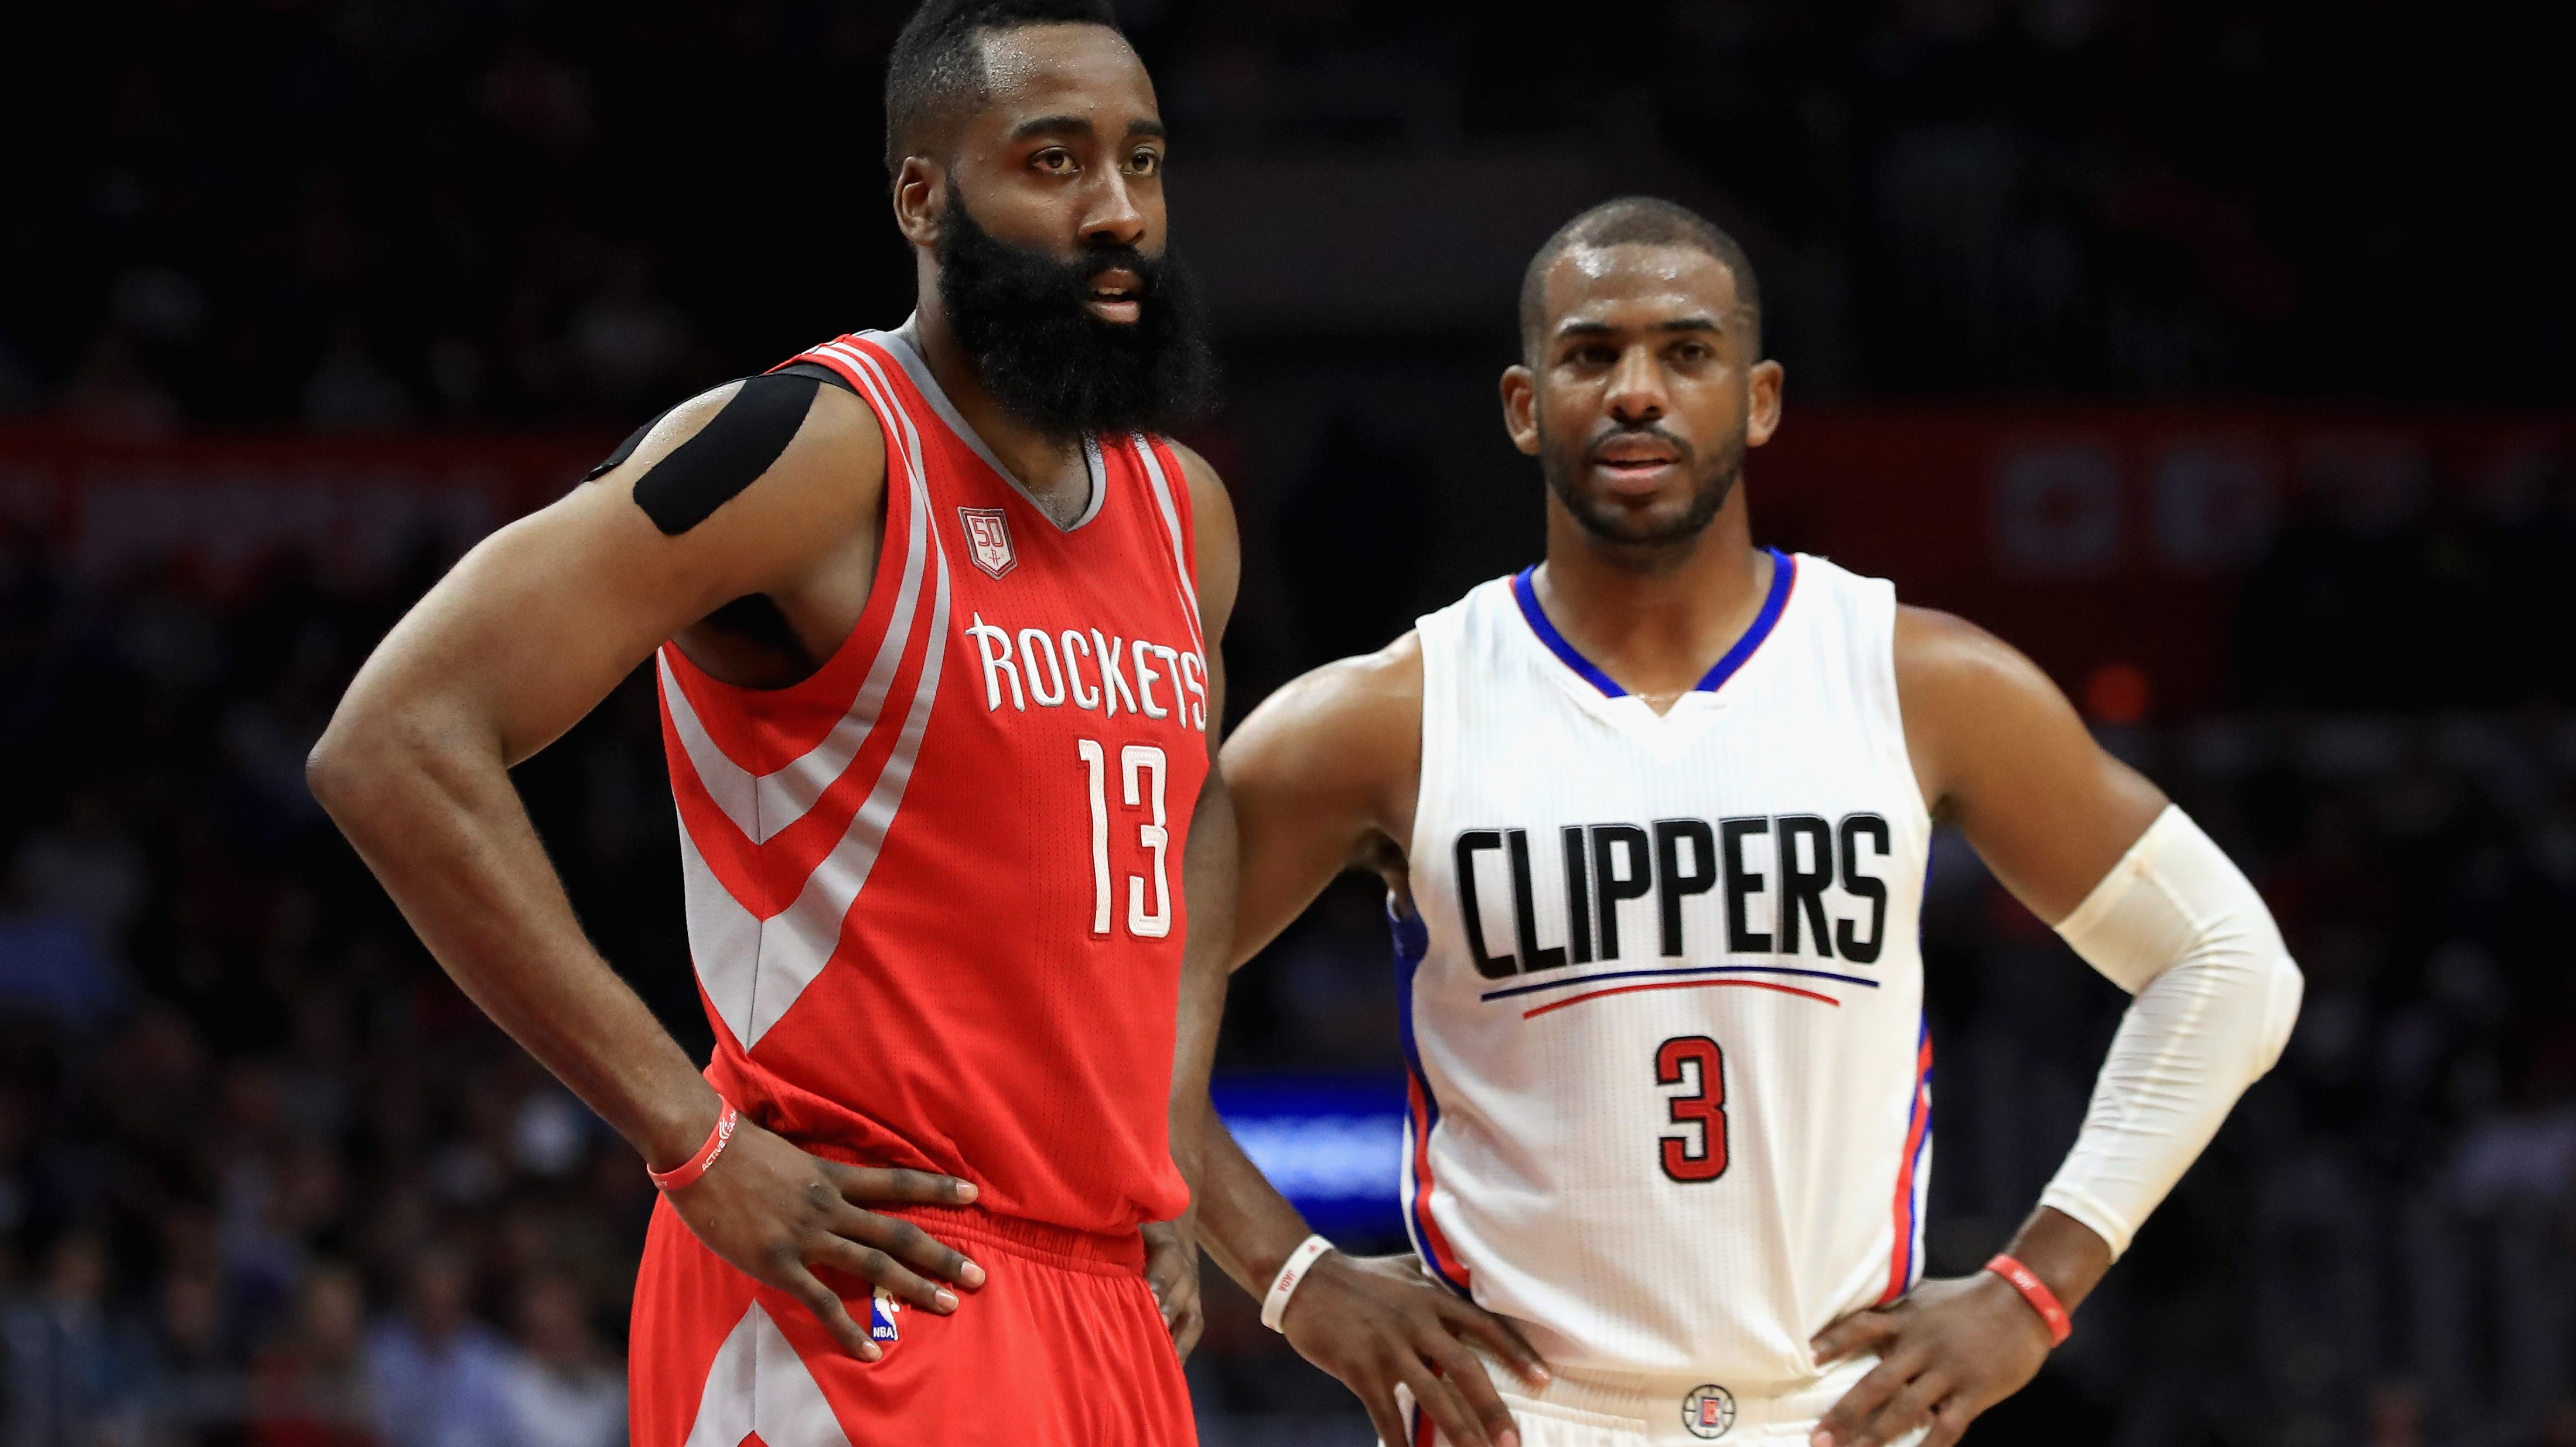 Rockets Roster & Starting Lineup After Chris Paul Trade